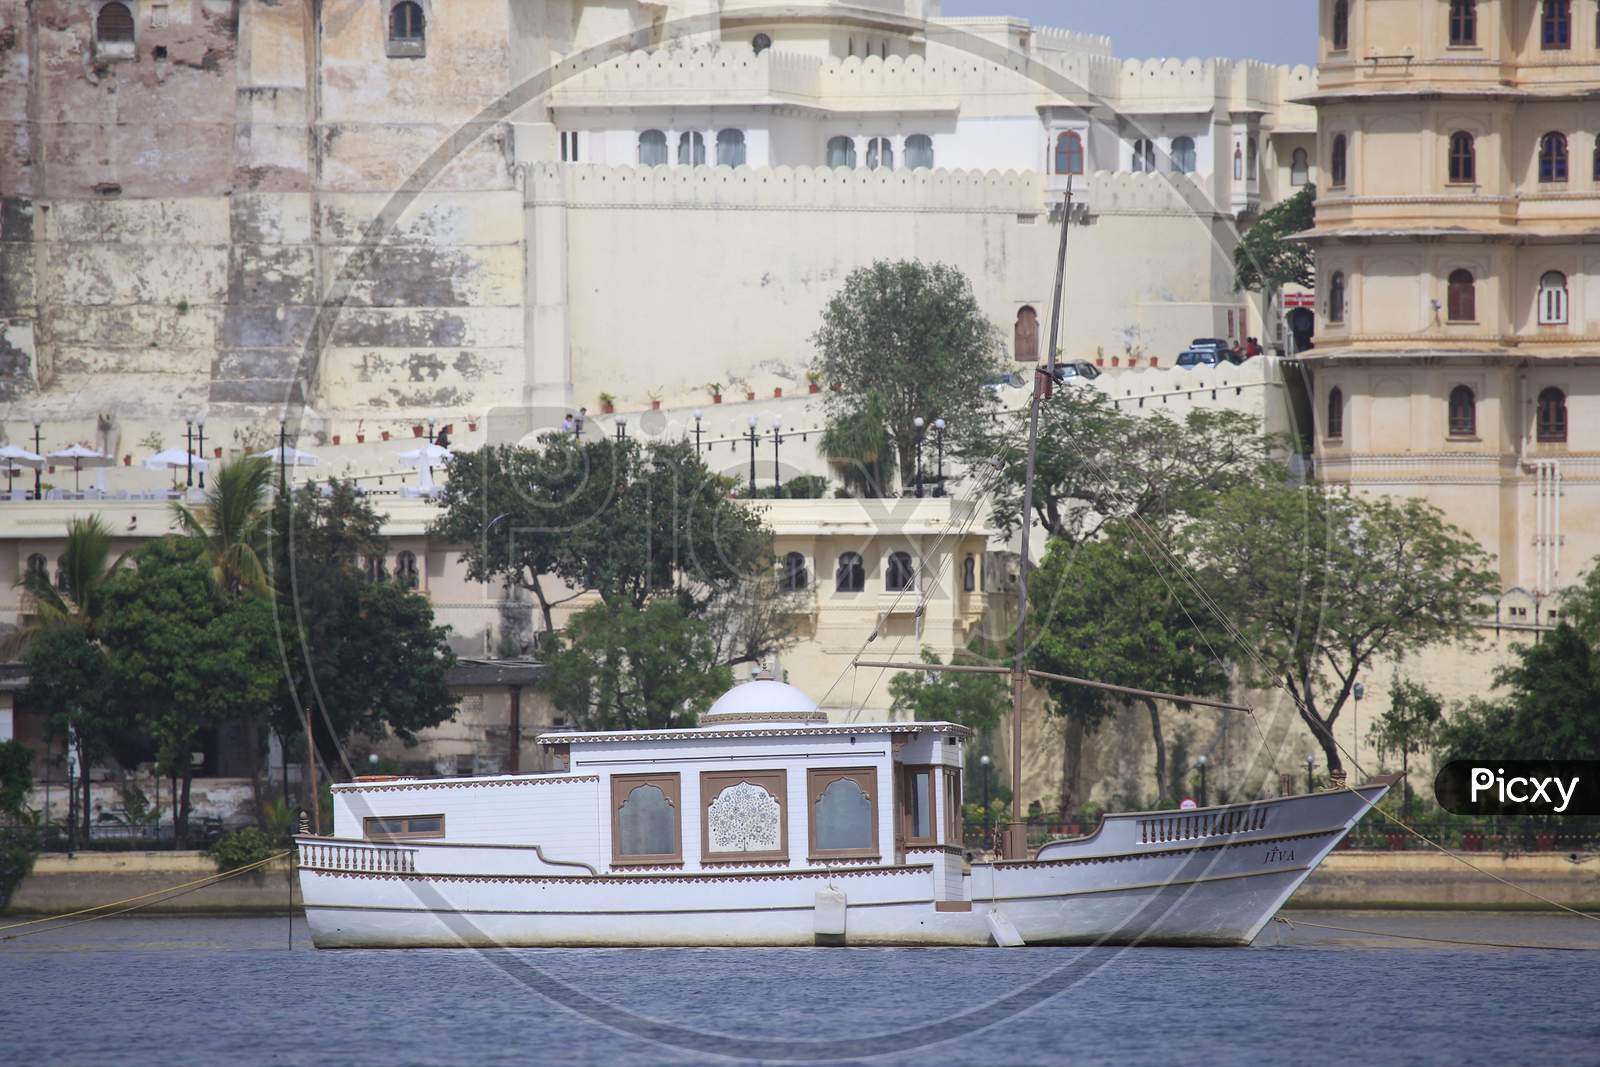 A Traditional Boat for Tourists in Lake Palace, Udaipur